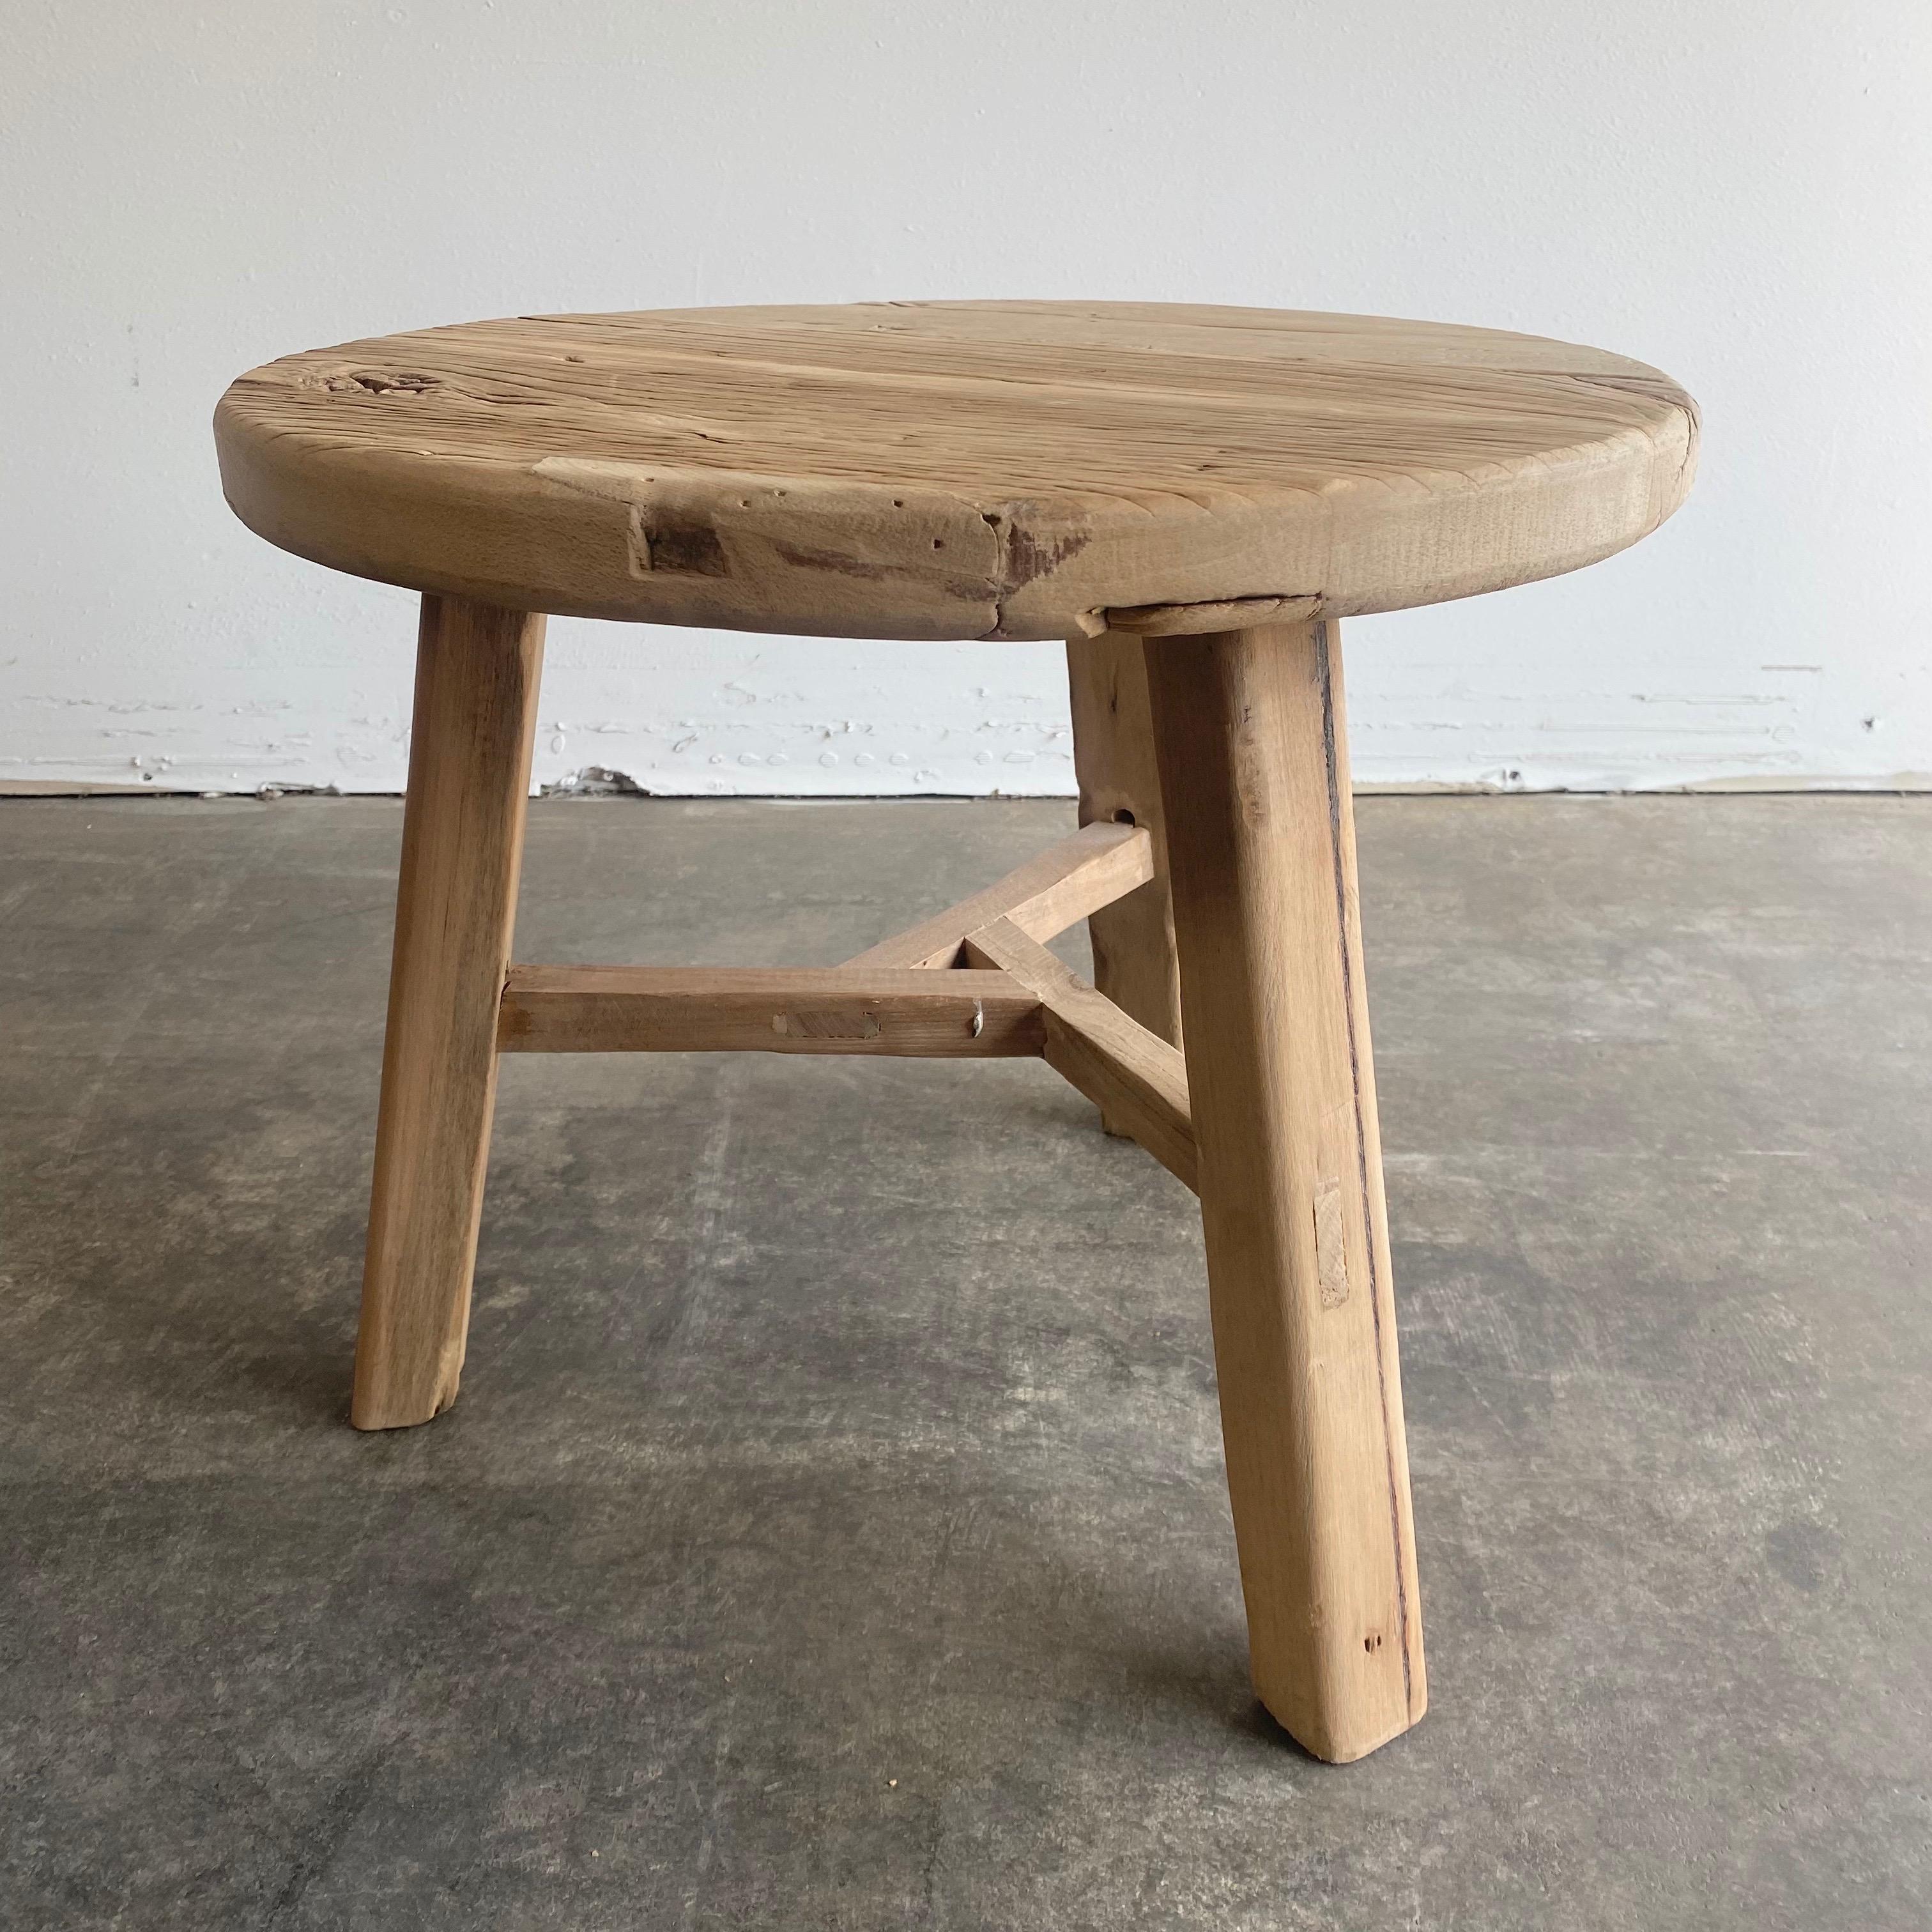 Round natural side table made from reclaimed elmwood Raw natural finish, a warm honey with gray tones in the wood. Solid and sturdy, a great side table for next to a bed, sofa, chairs. Can be stained or painted for a customized look
 Size: 21 x 21